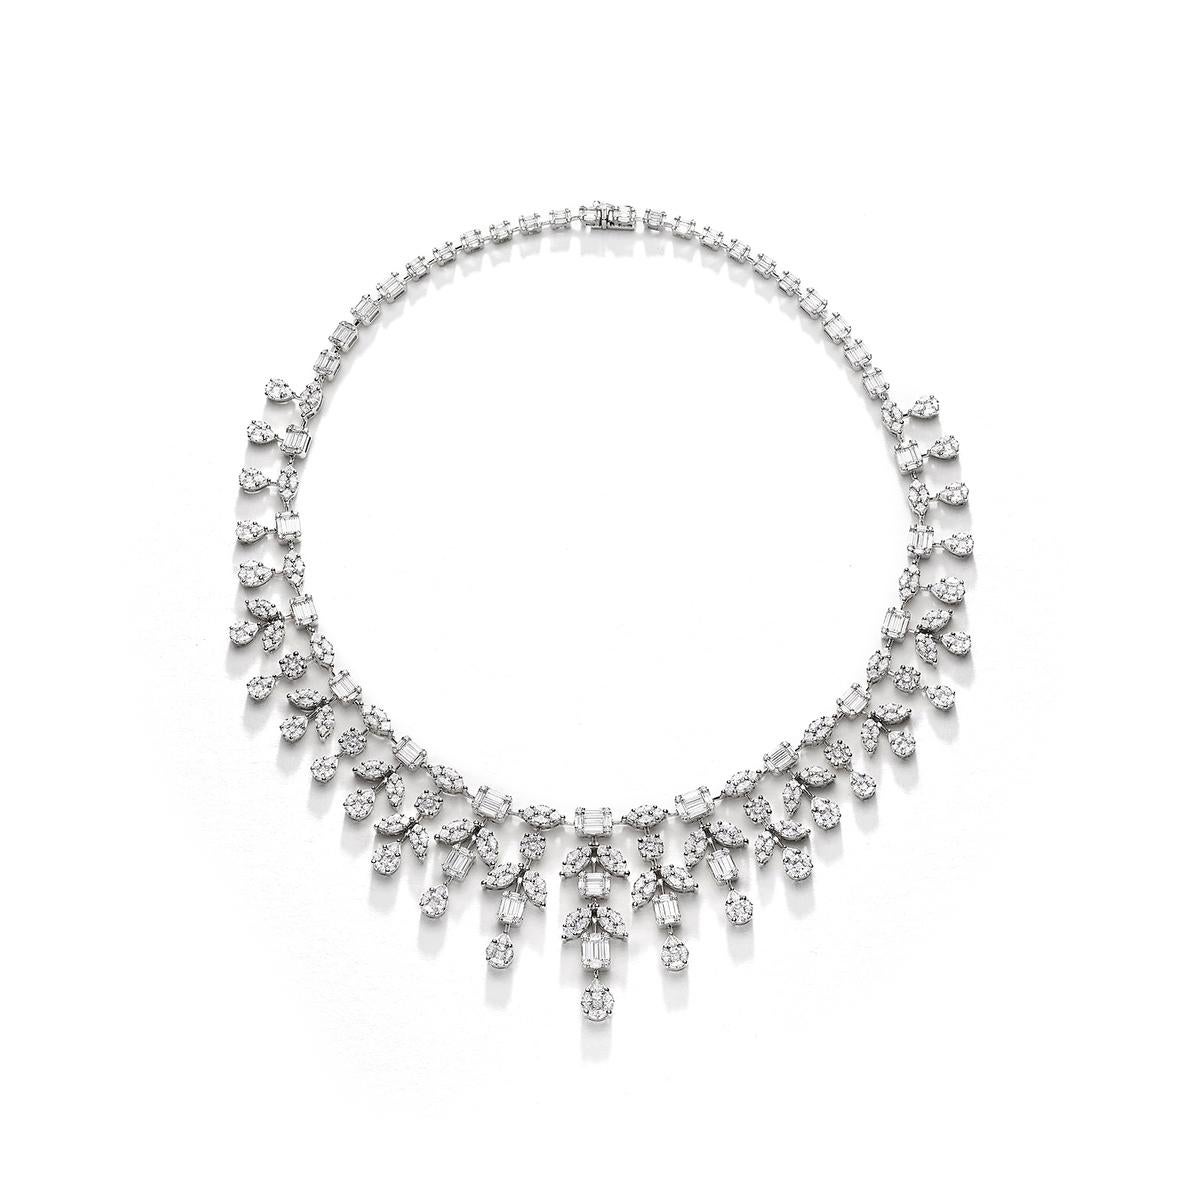 Necklace in 18kt white gold set with 554 pear-shaped, baguette, princess marquise cut diamonds 23.76 cts and 236 diamonds 2.42 cts